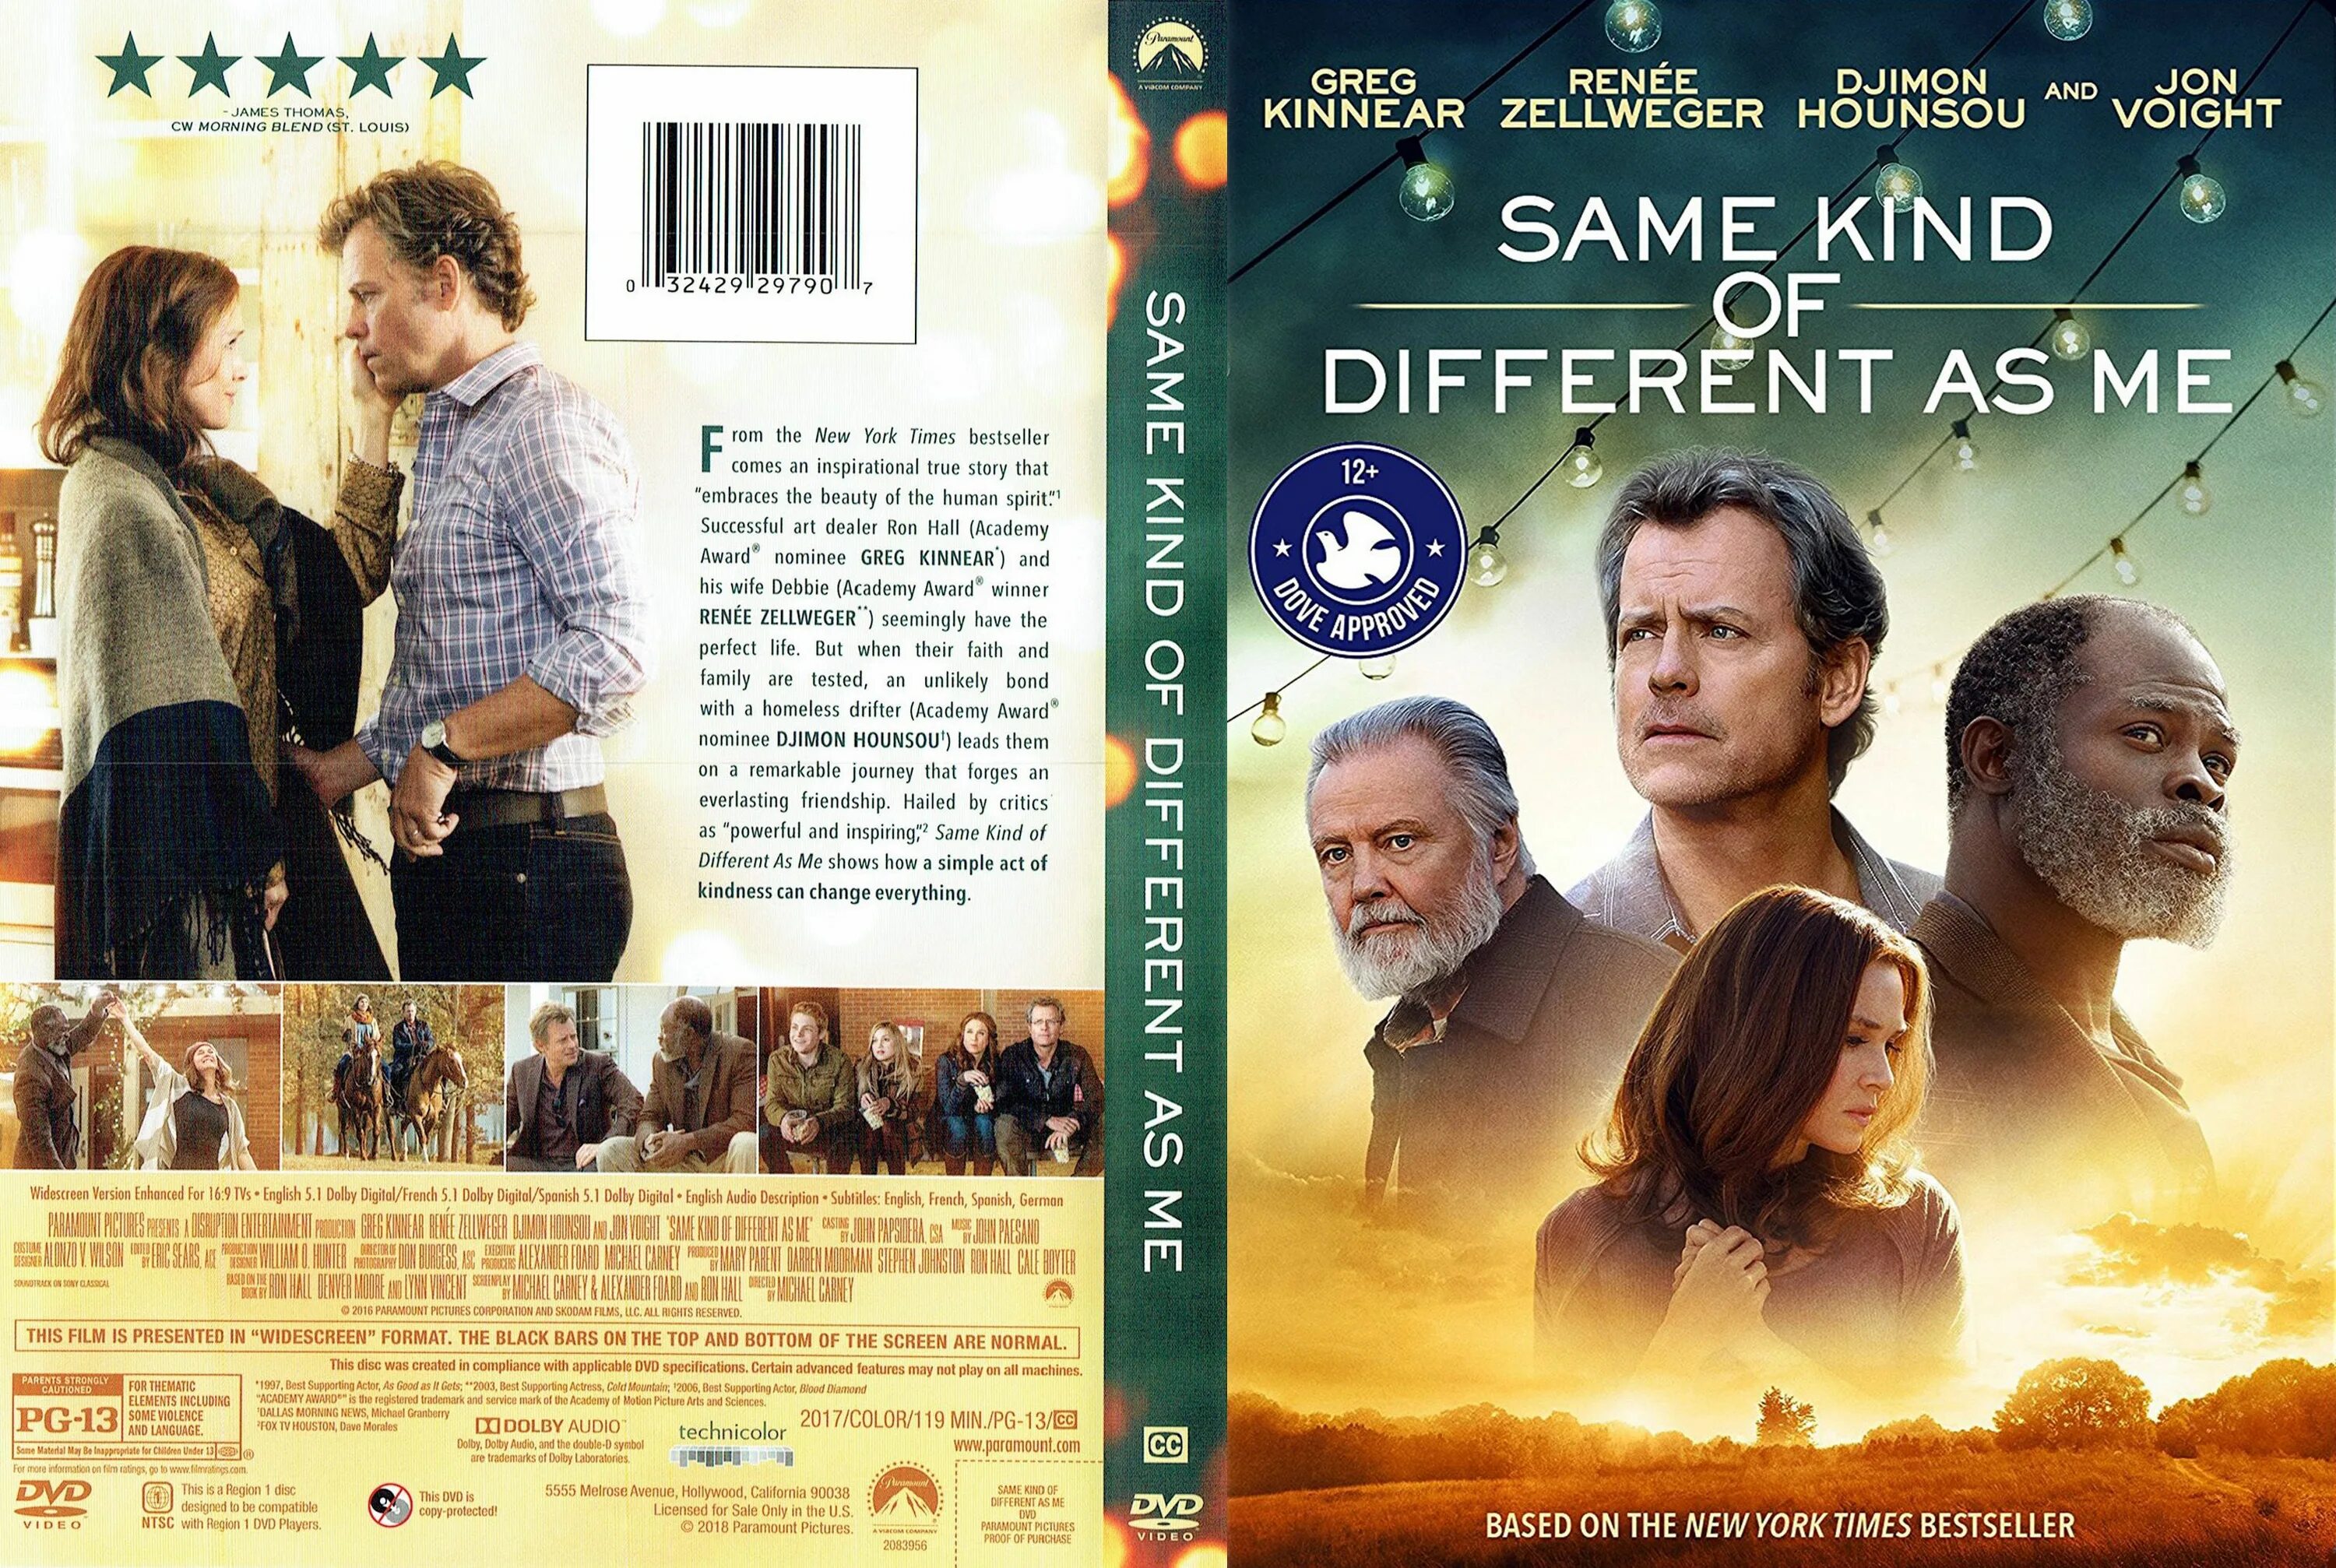 Same kind as different as me. Here with me DVD обложка. More of me DVD. Same frames in different movies.